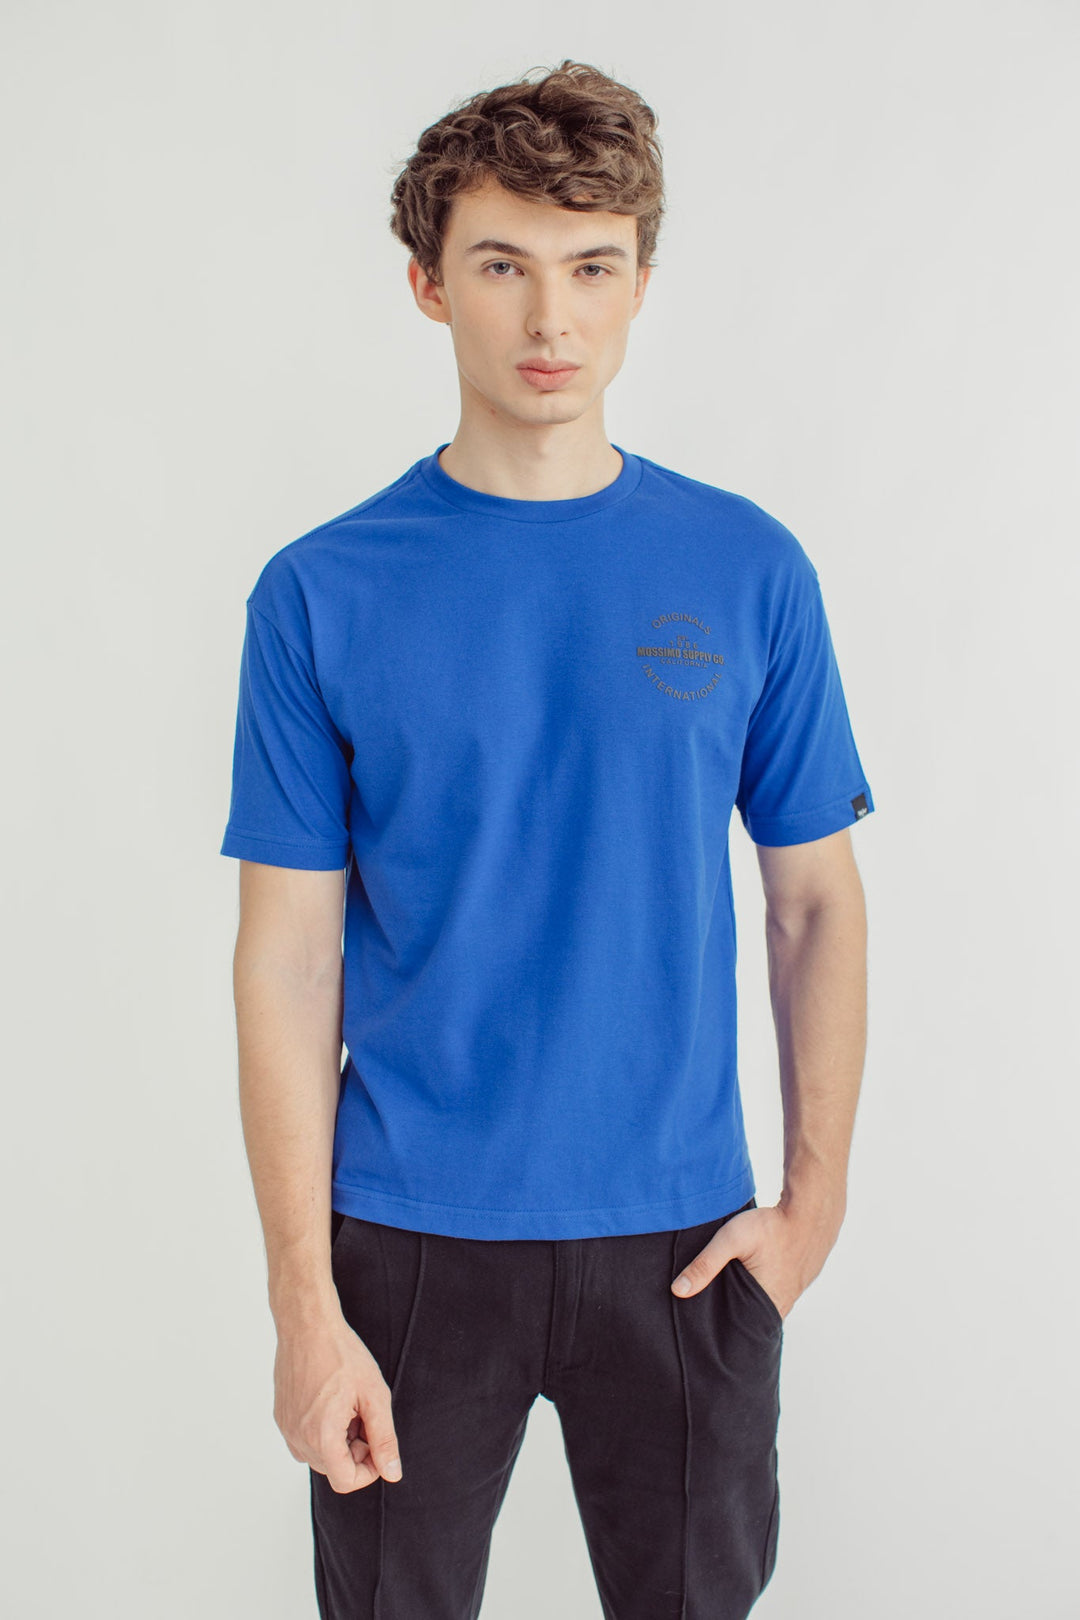 Dazzling with Small Branding Urban Fit Tee - Mossimo PH